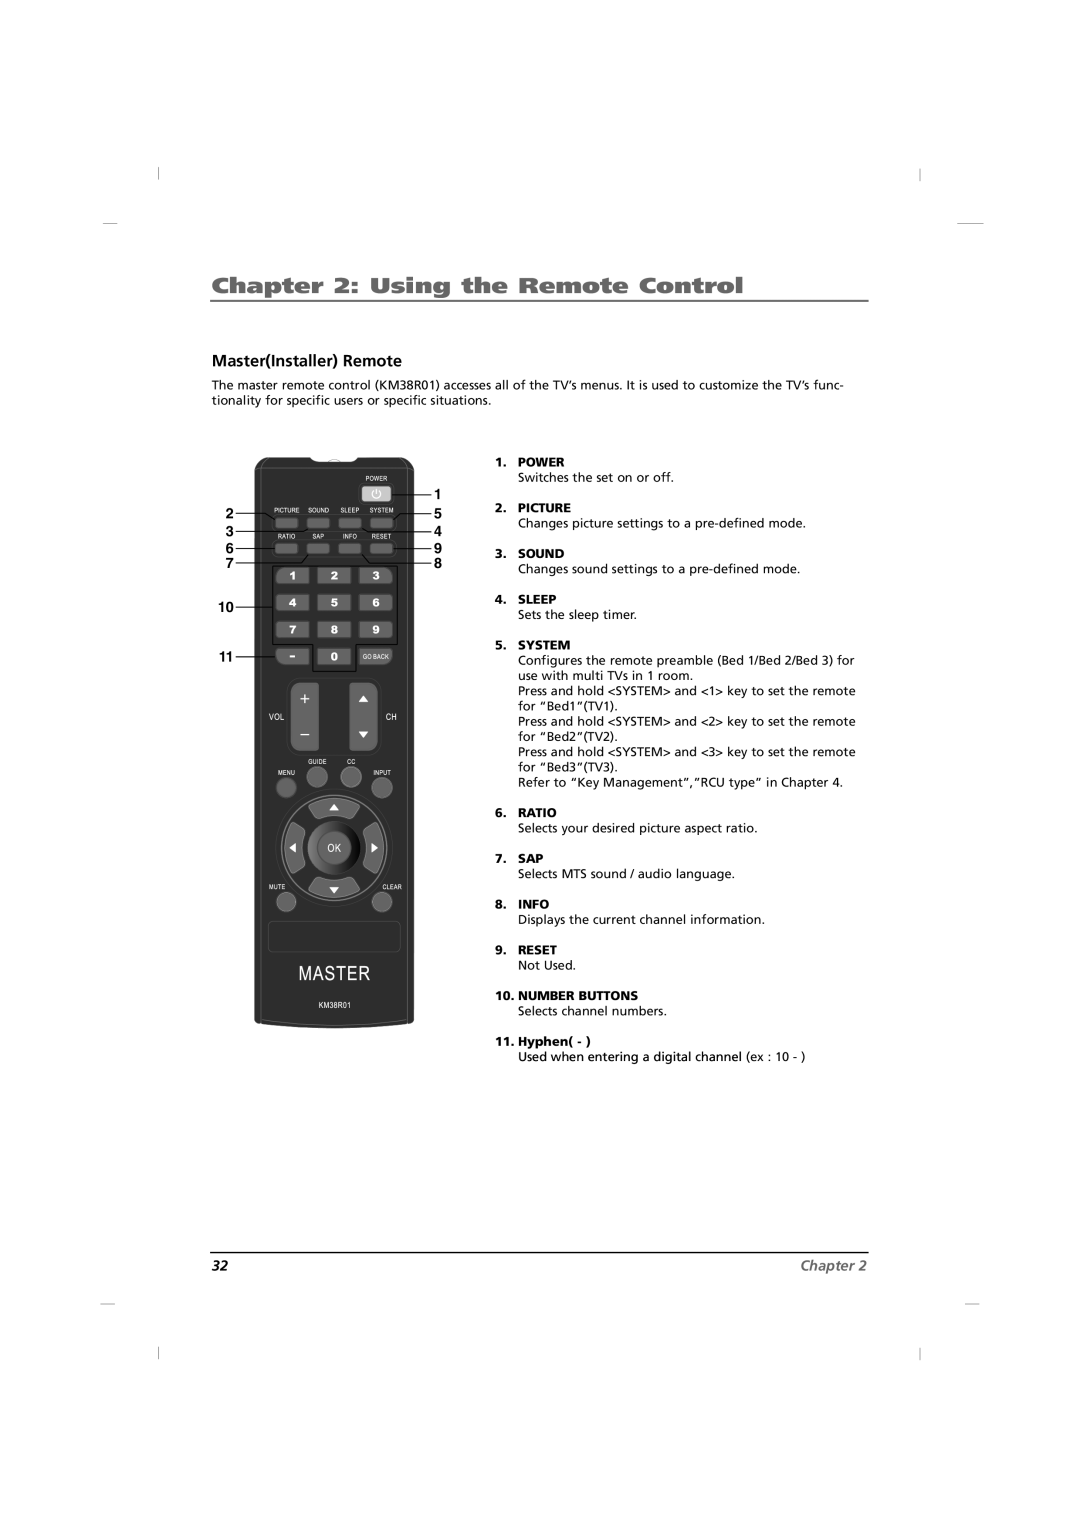 RCA J26HE820, J32HE720, J42HE820 manual MasterInstaller Remote, Using the Remote Control, Chapter 